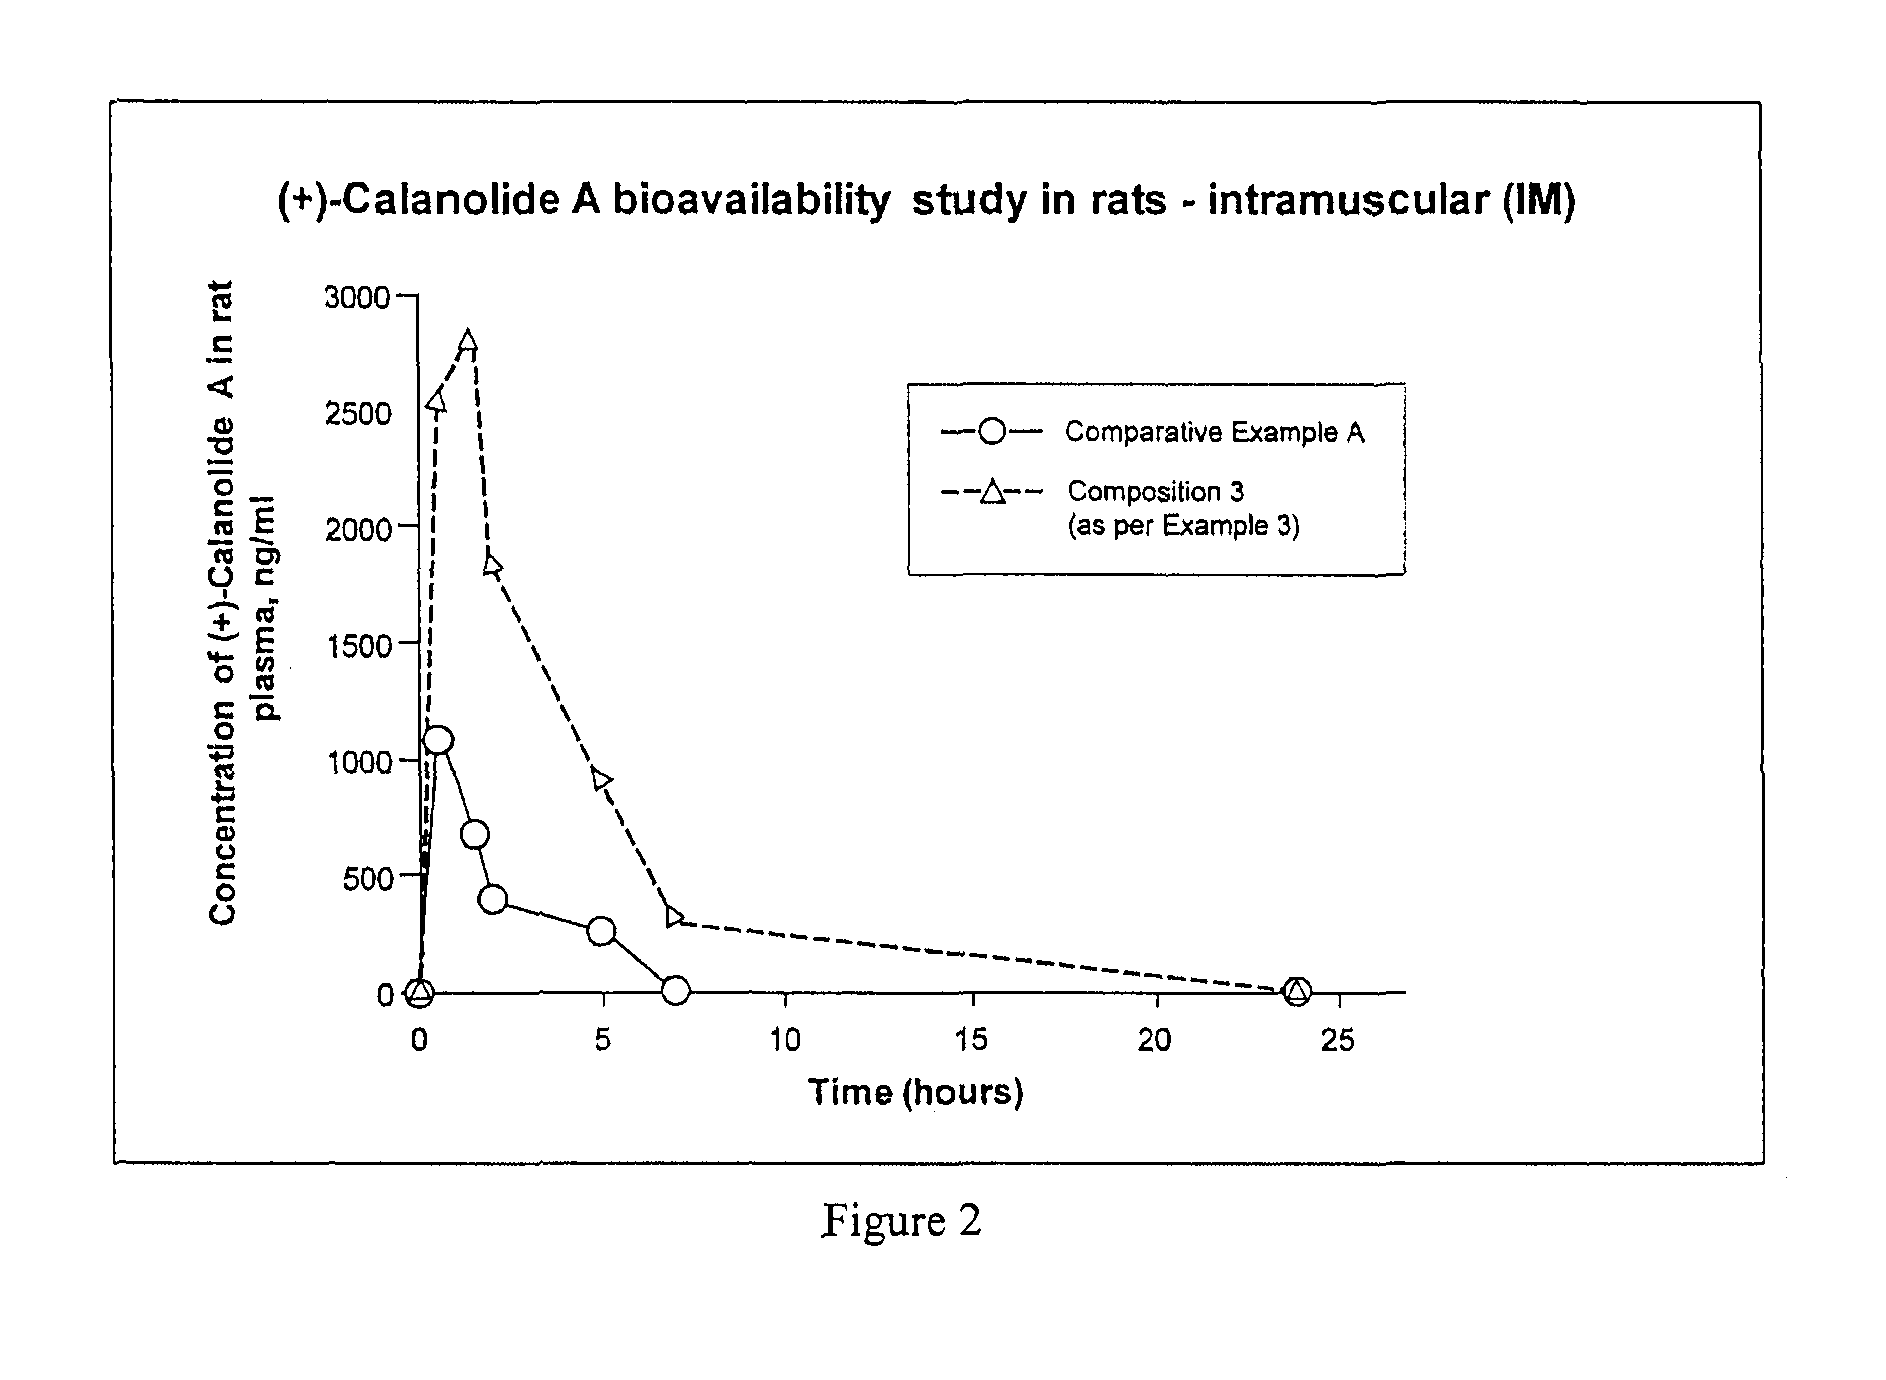 Pharmaceutical compositions for calanolides, their derivatives and analogues, and process for producing the same